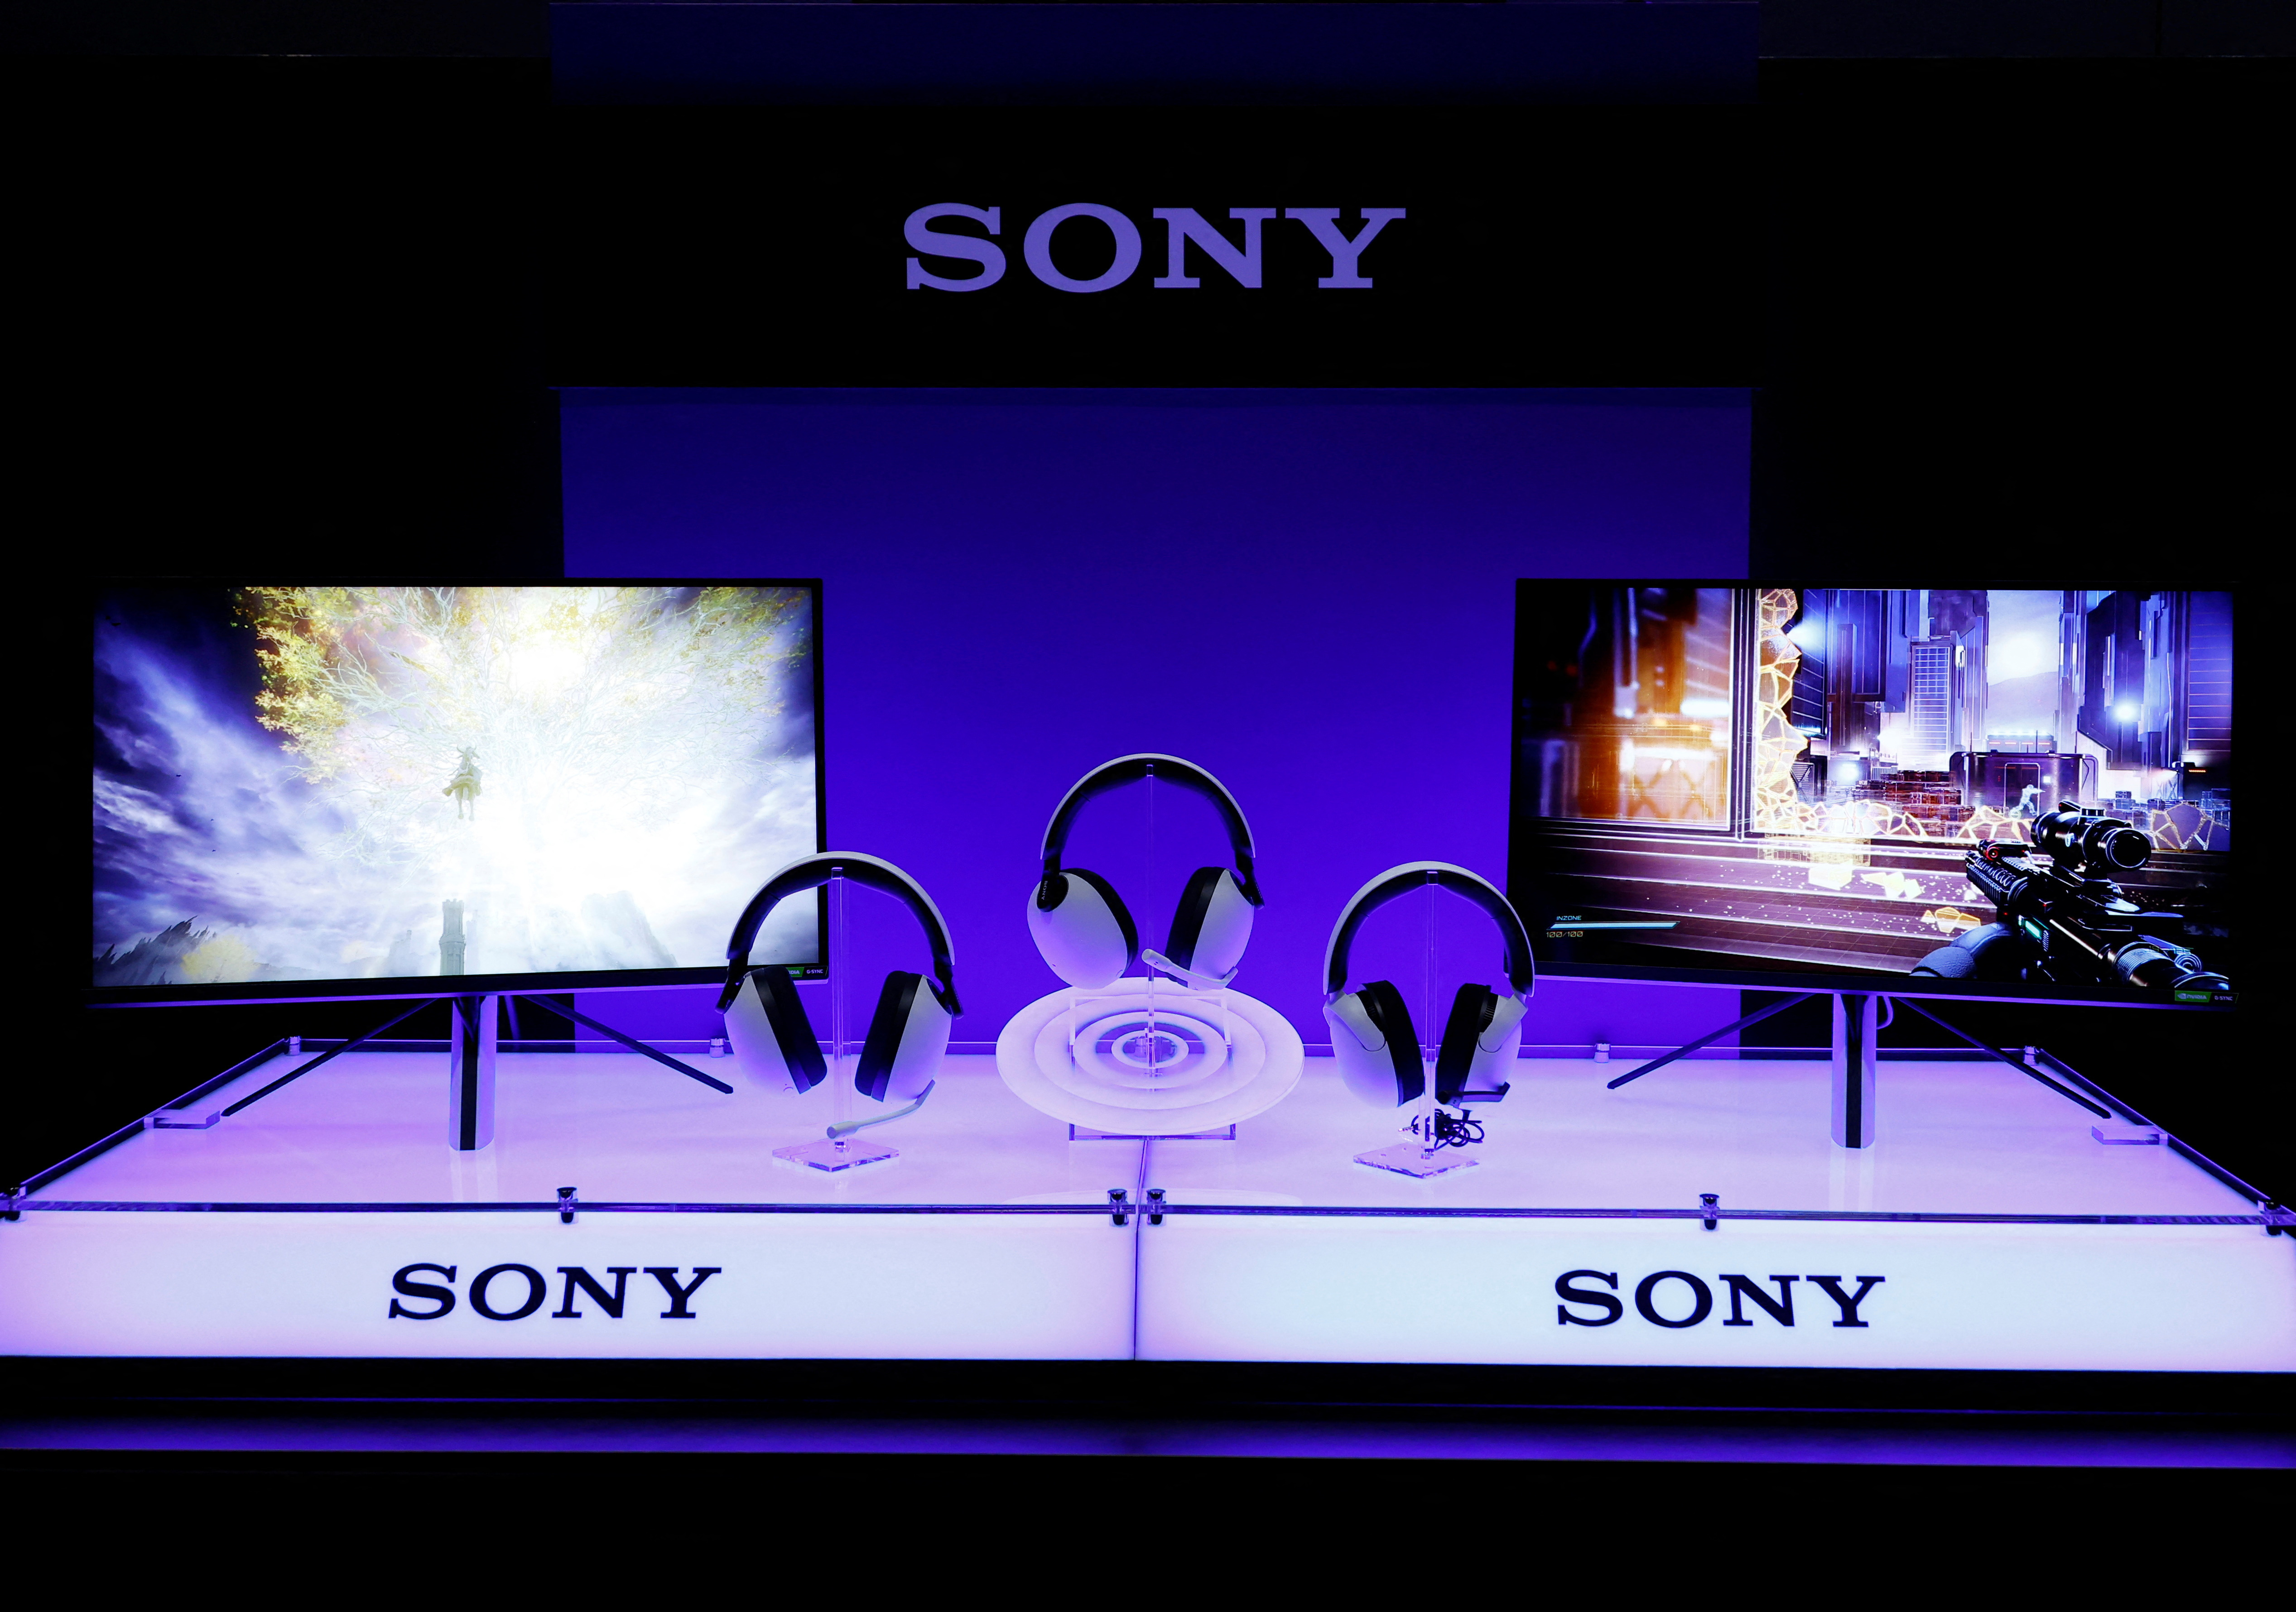 Sony Group Corp's new line of headphones and monitors targeting the growing PC market for video games, the Inzone line, is displayed during its unveiling in Tokyo